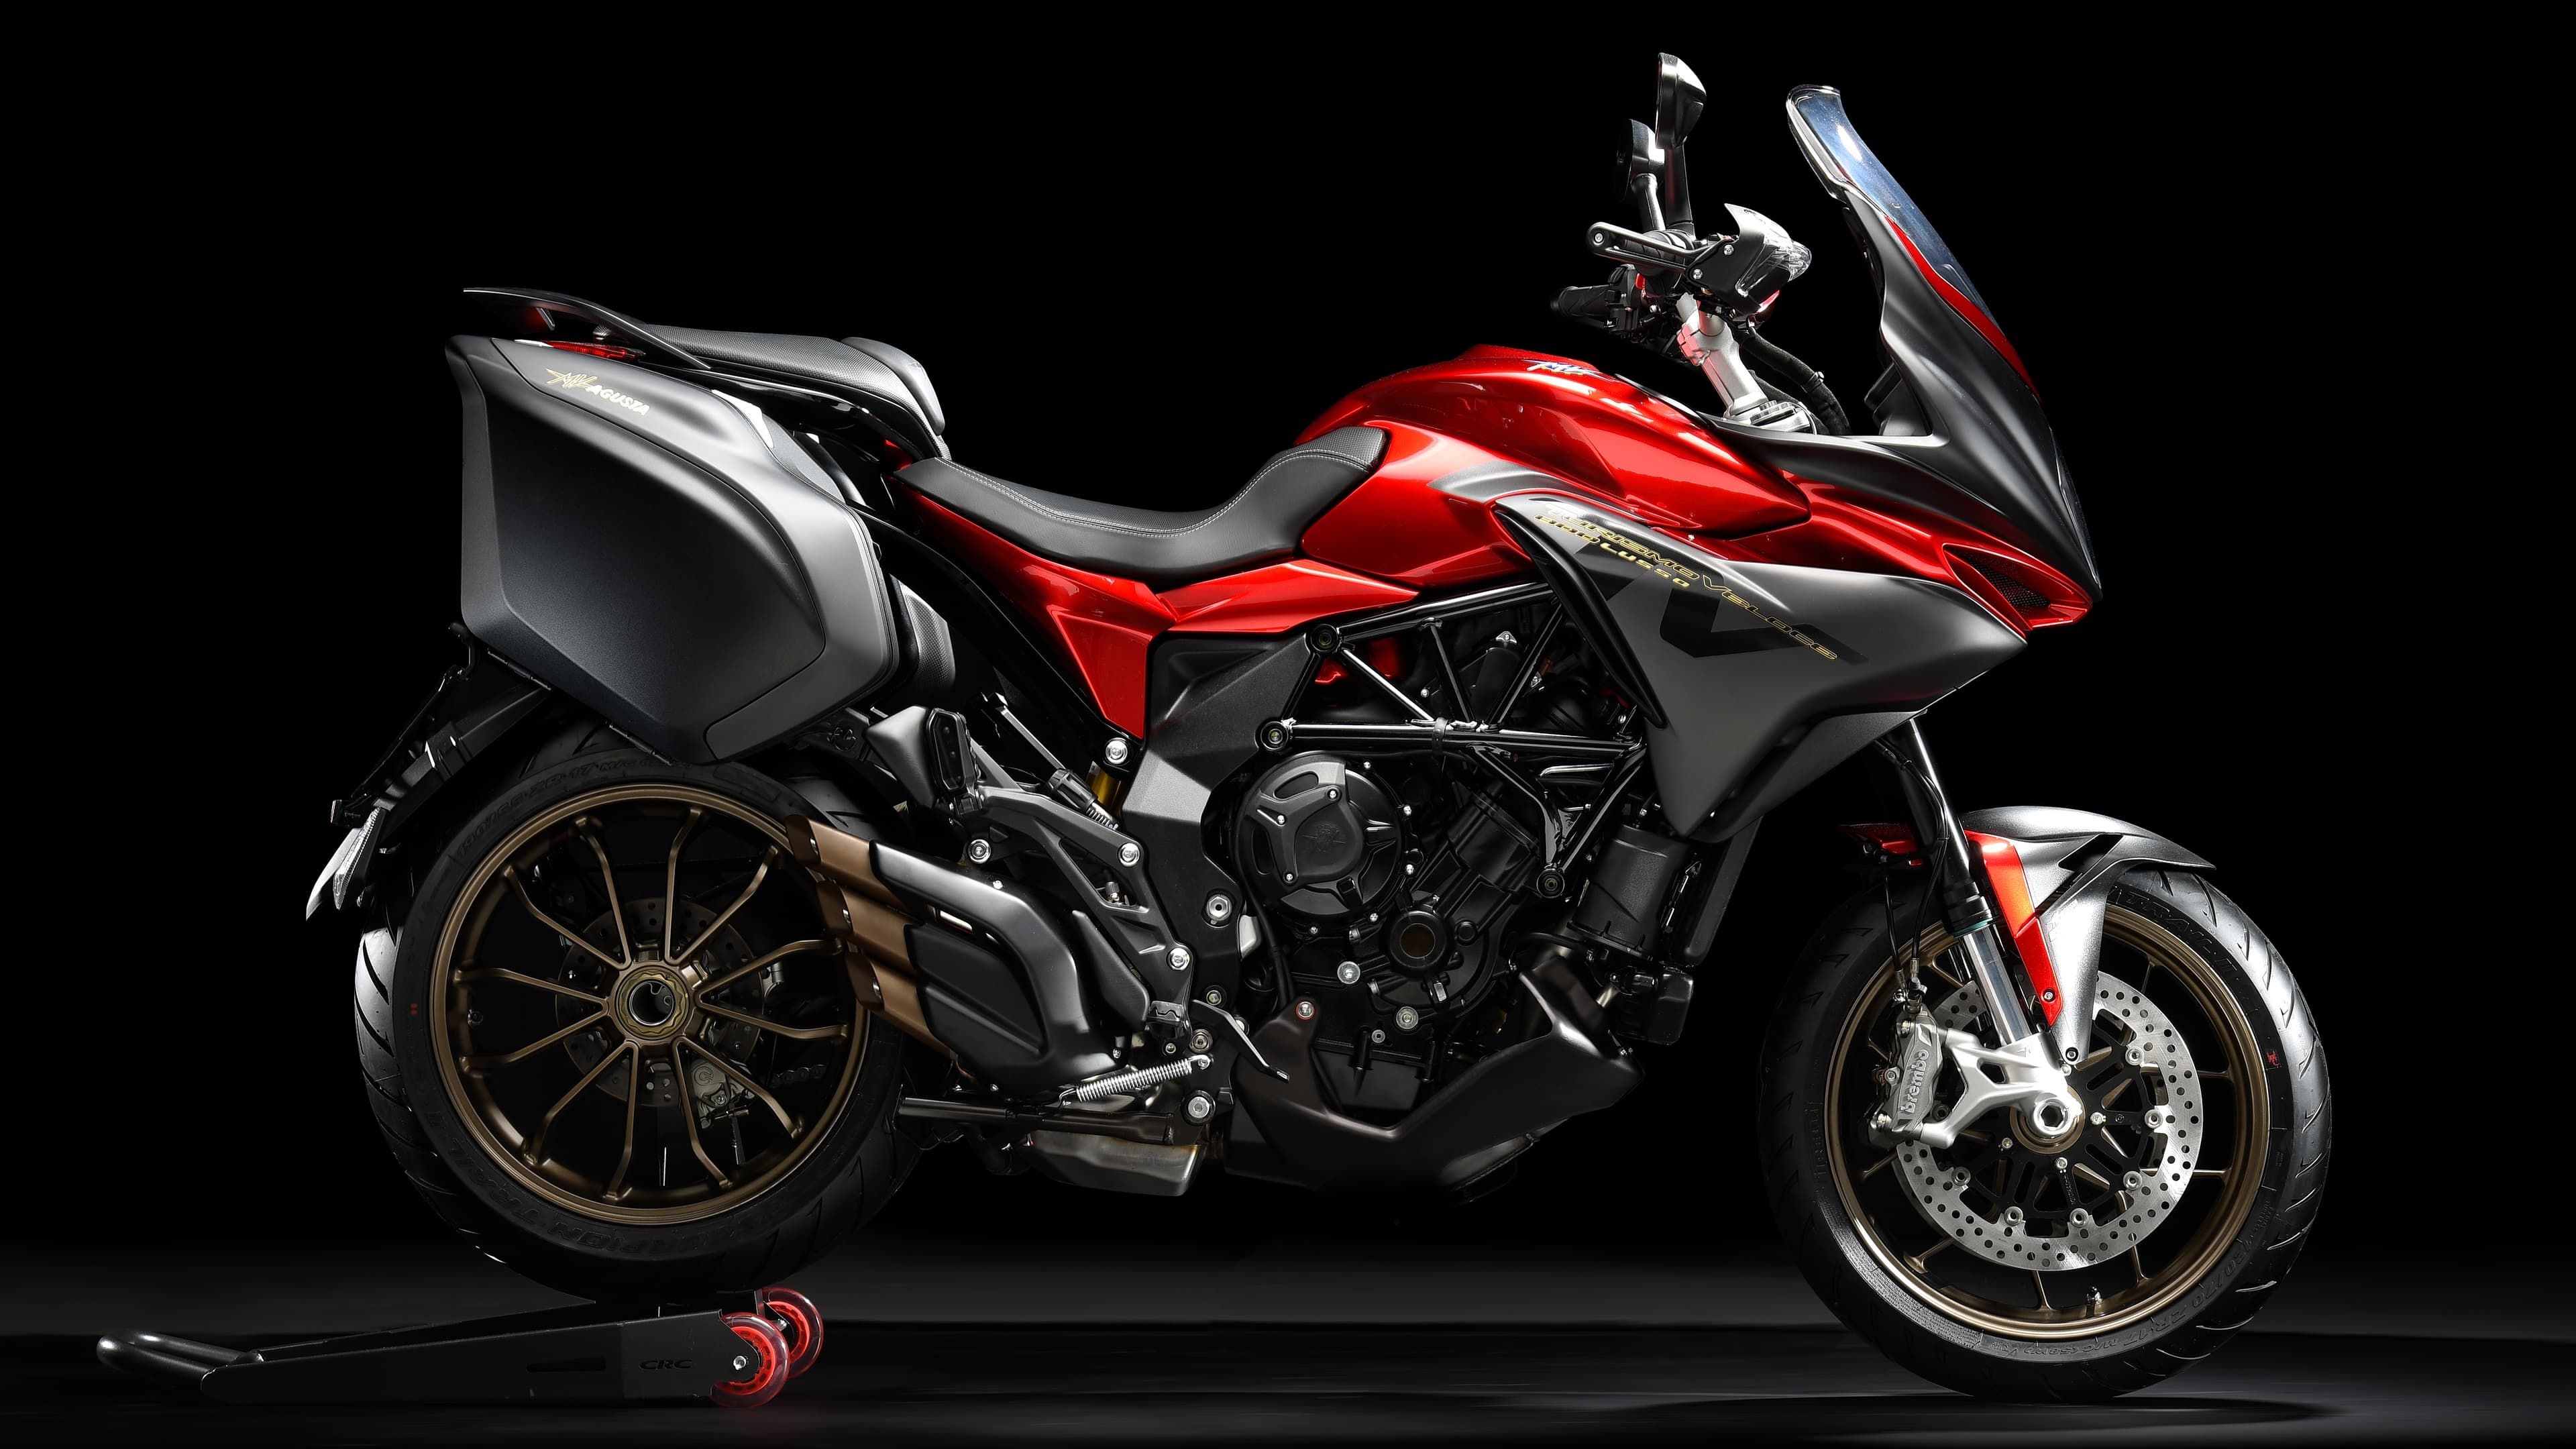 MV Agusta Turismo Veloce, Lusso edition, Red motorcycle, Motorcycle wallpaper, 3840x2160 4K Desktop